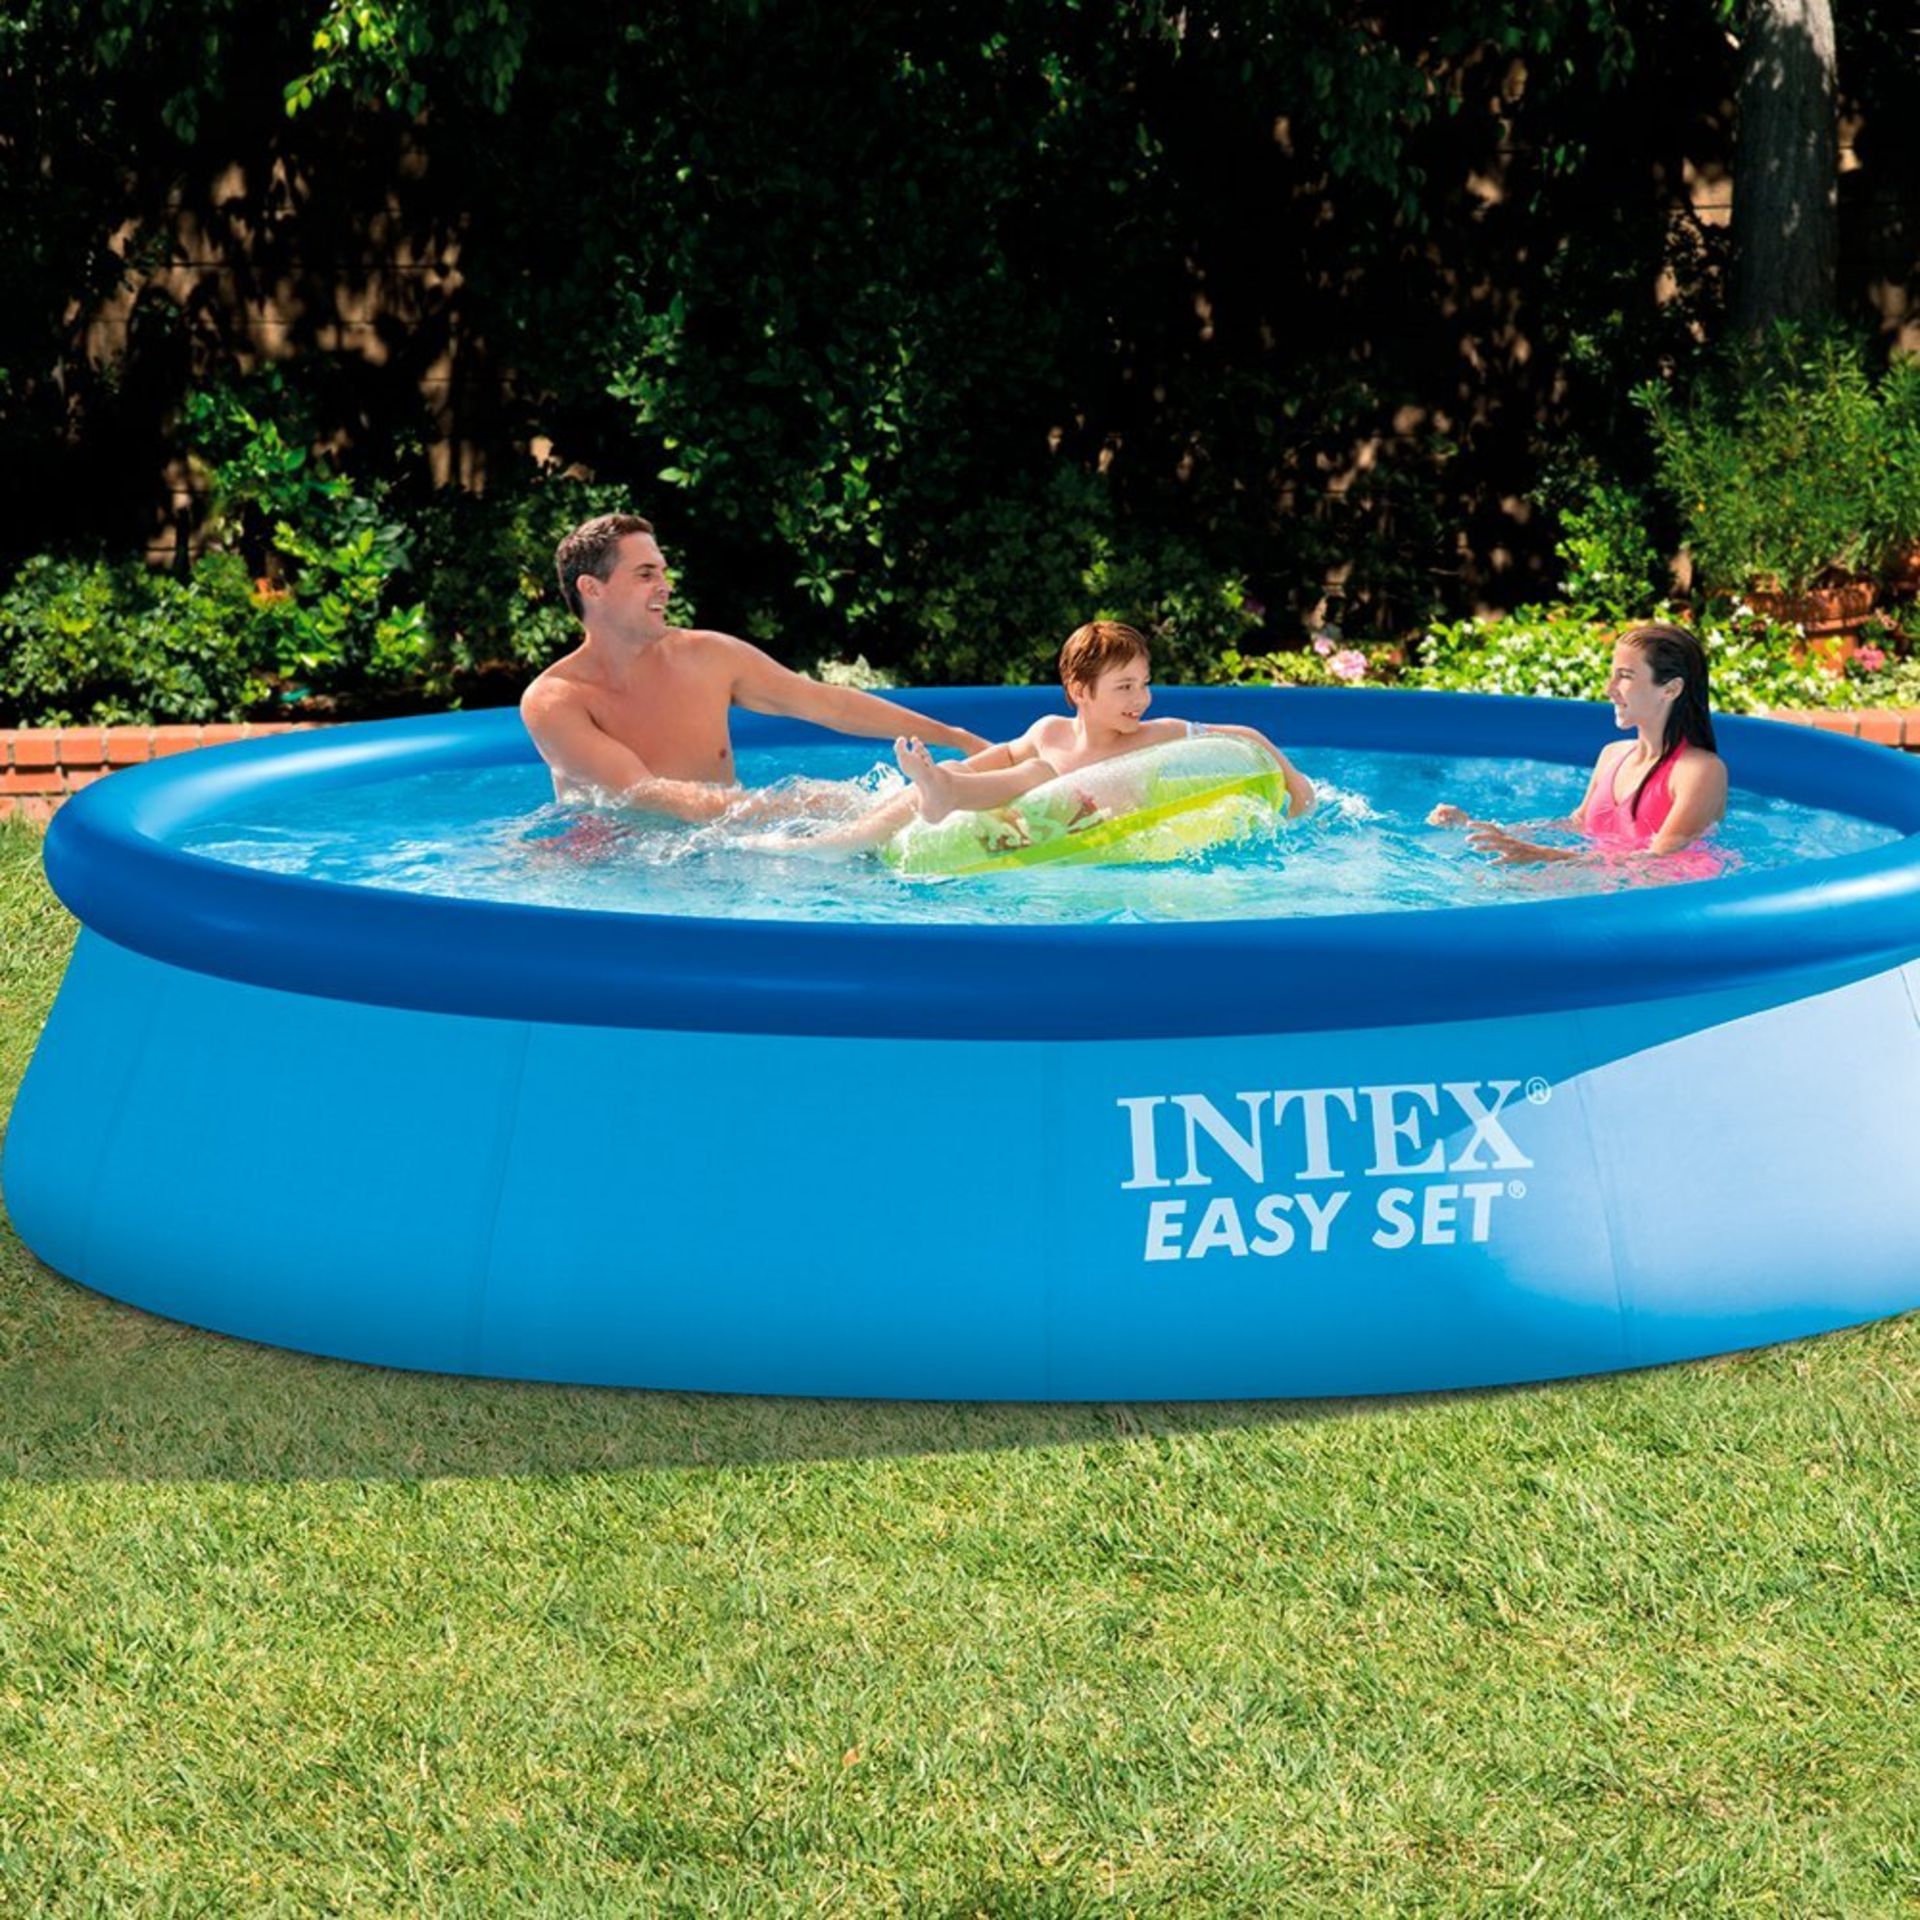 Intex Easy Set 12ft x 30in Pool with Filter Pump (Blue) RRP £129.99